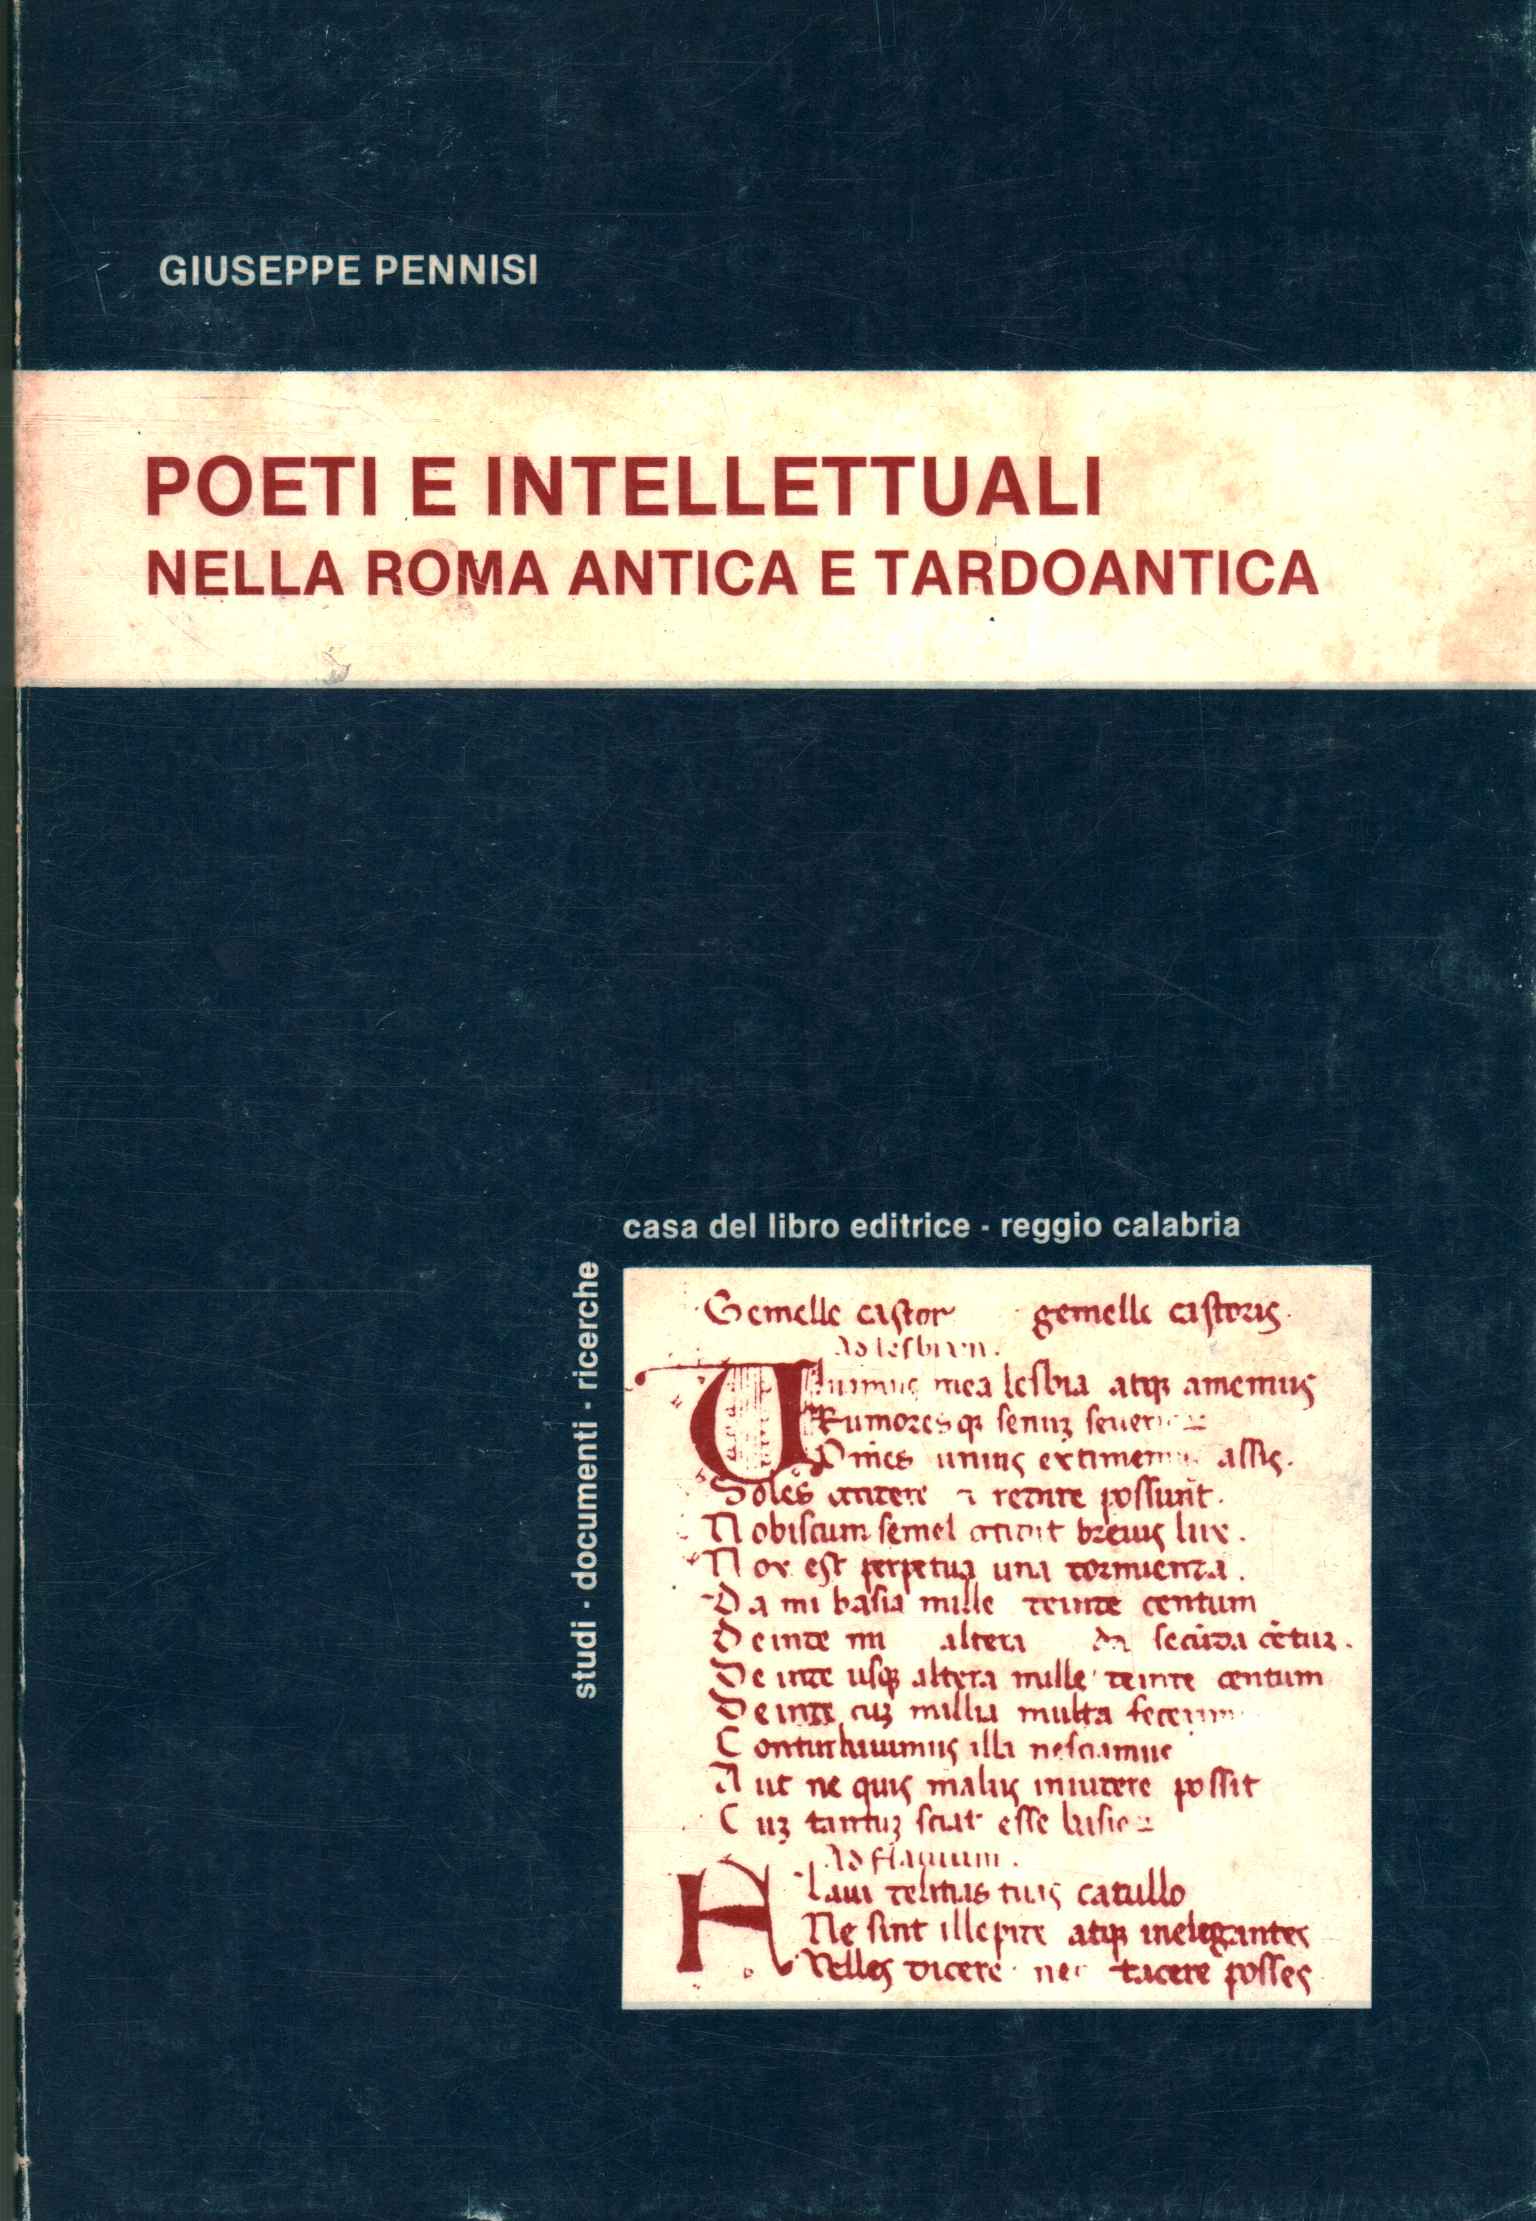 Poets and intellectuals